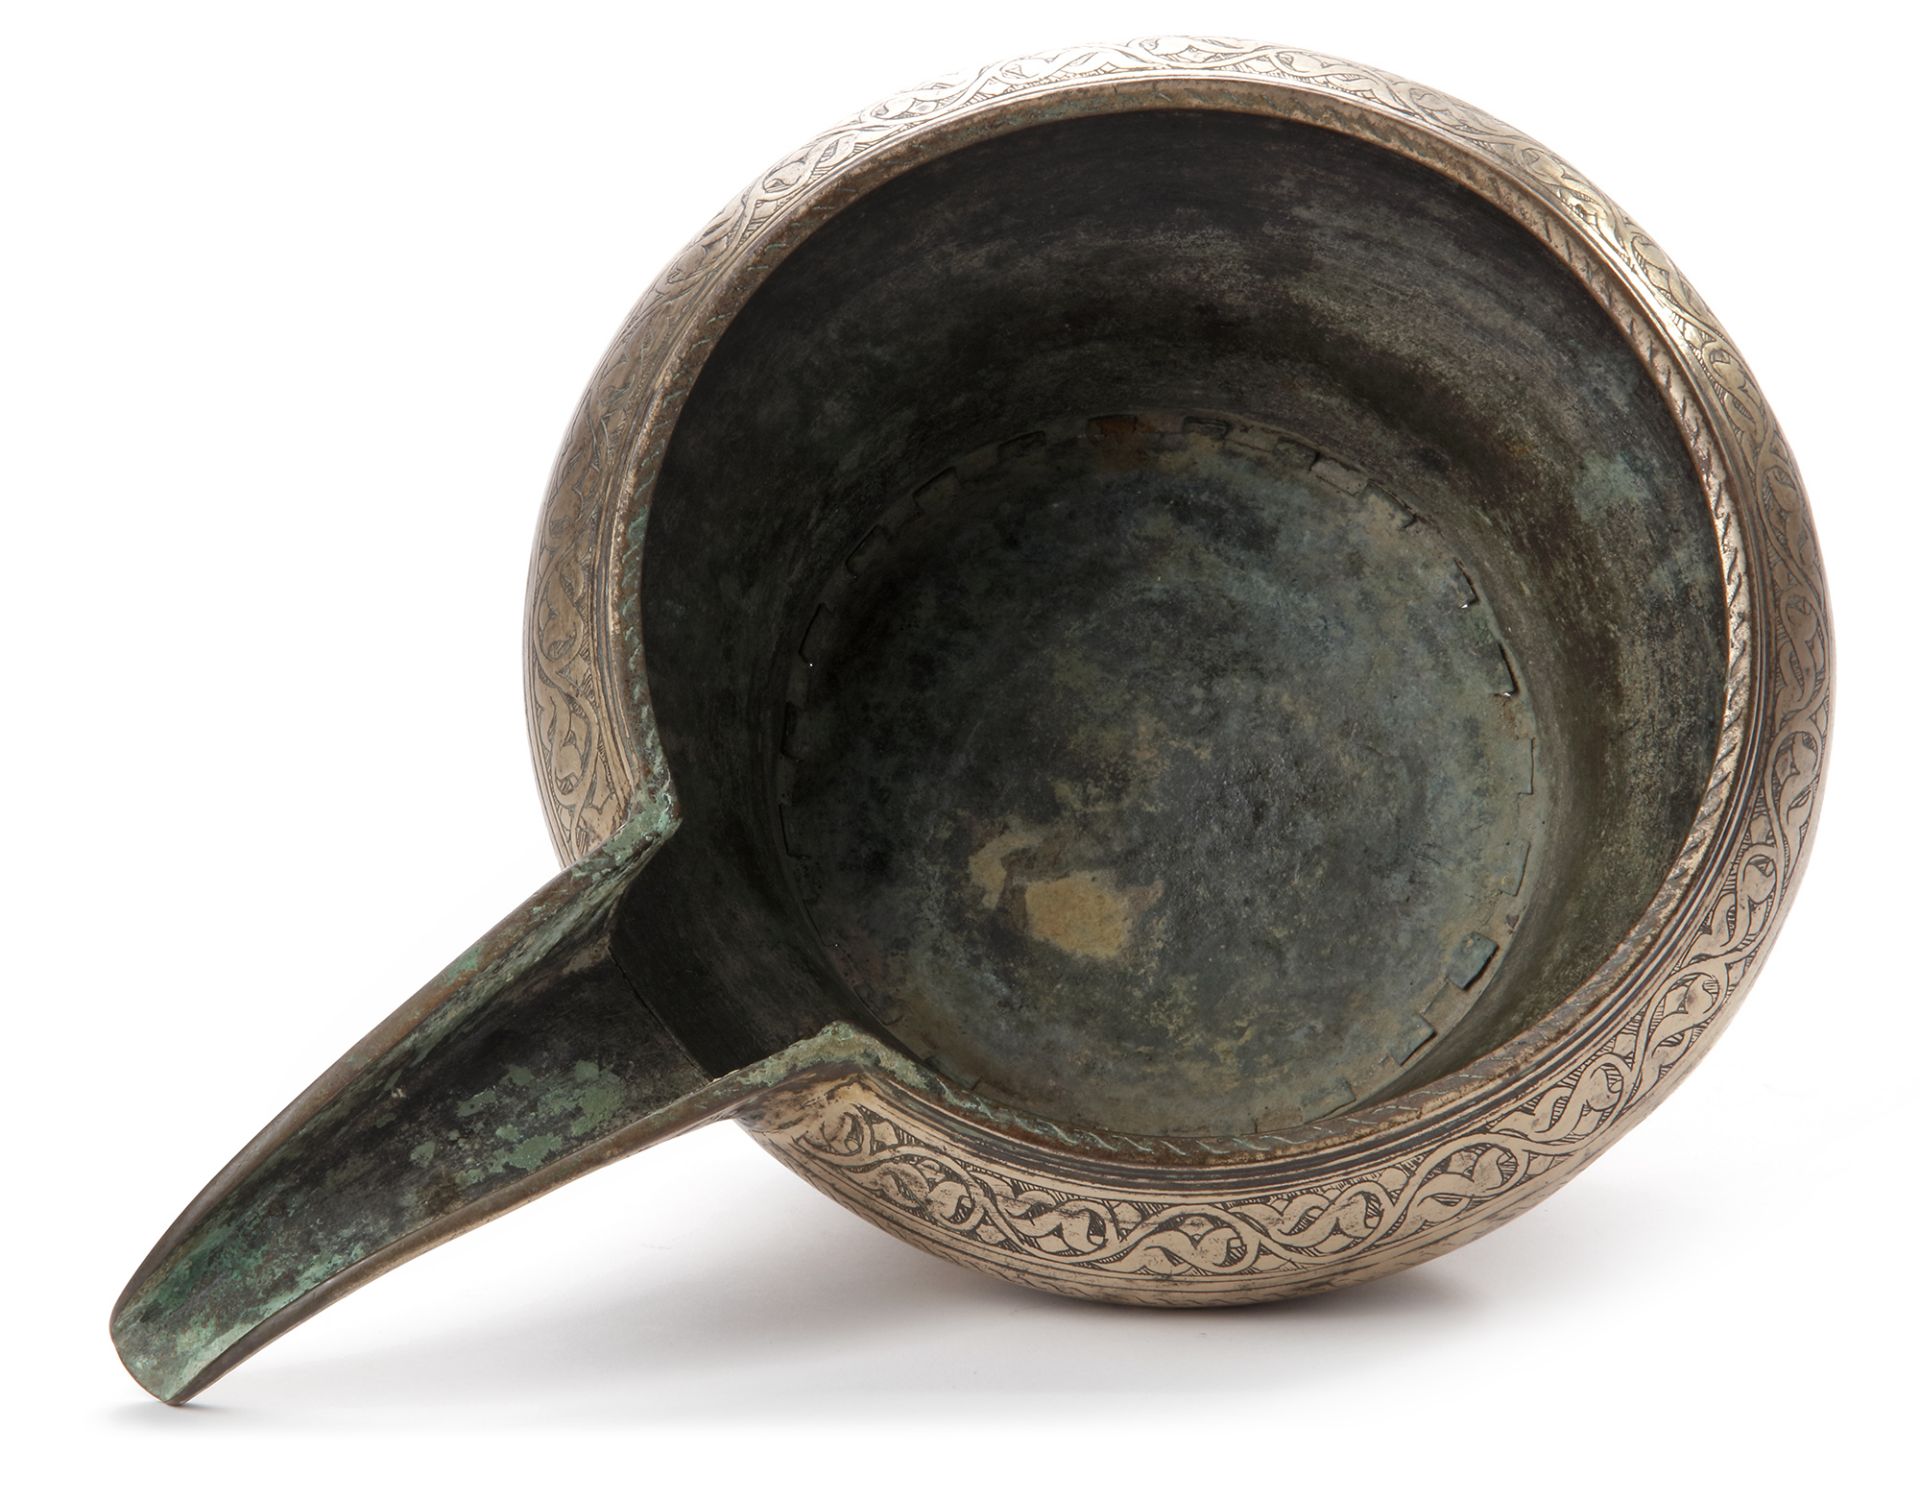 AN ENGRAVED SAFAVID TINNED COPPER SPOUTED POURING BOWL, PERSIA, 17TH CENTURY - Image 4 of 4